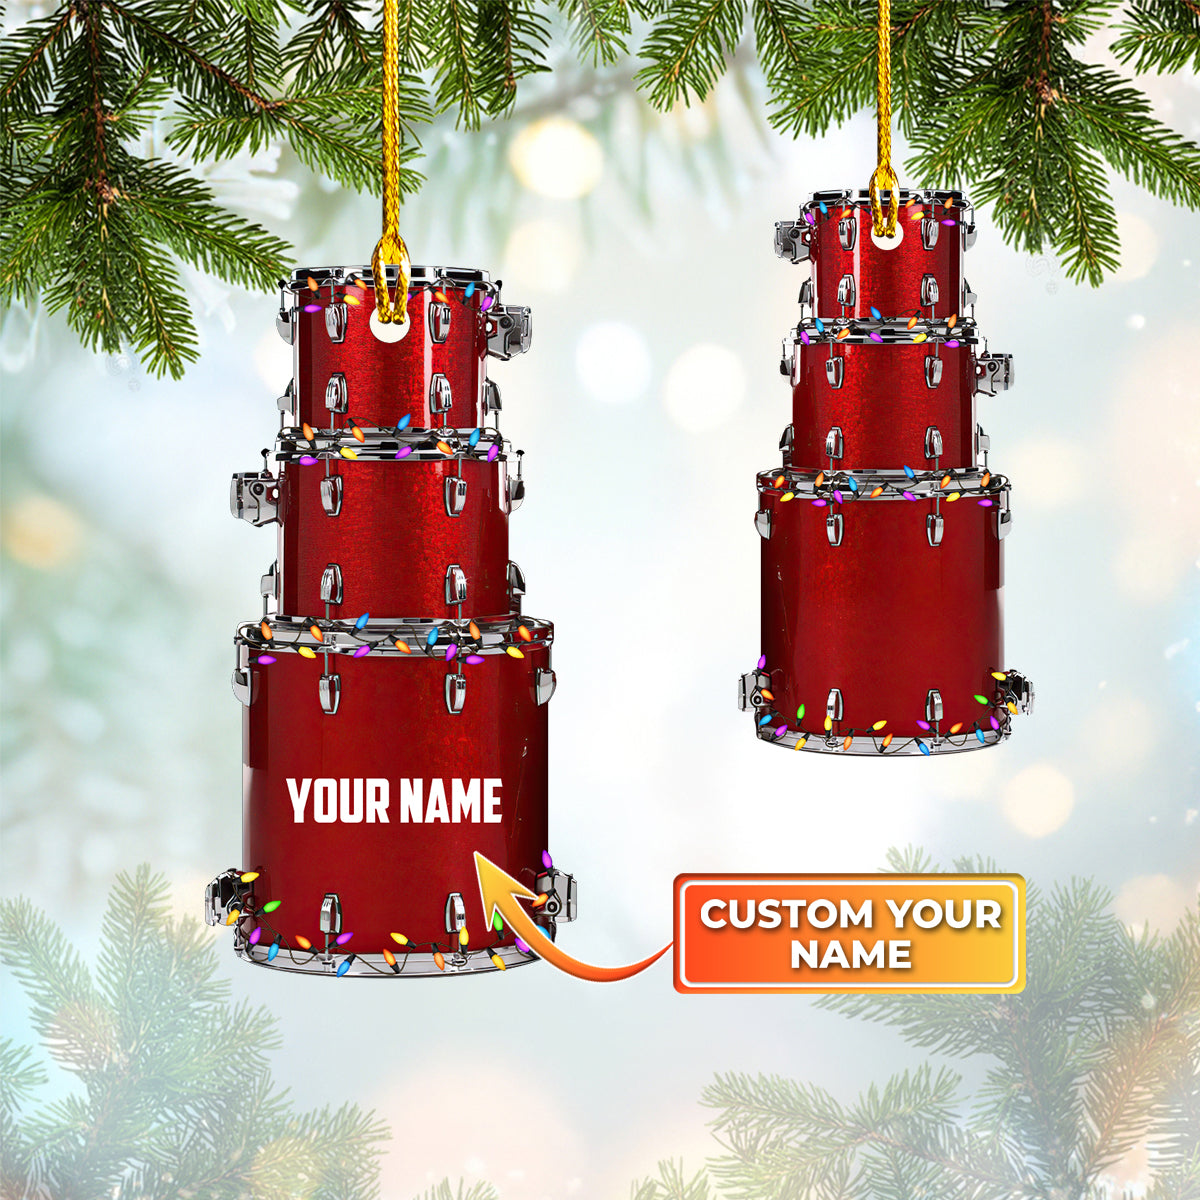 Personalized Name Drum Shaped Ornament/ Drummer/ Christmas Drum Set Shaped Ornament